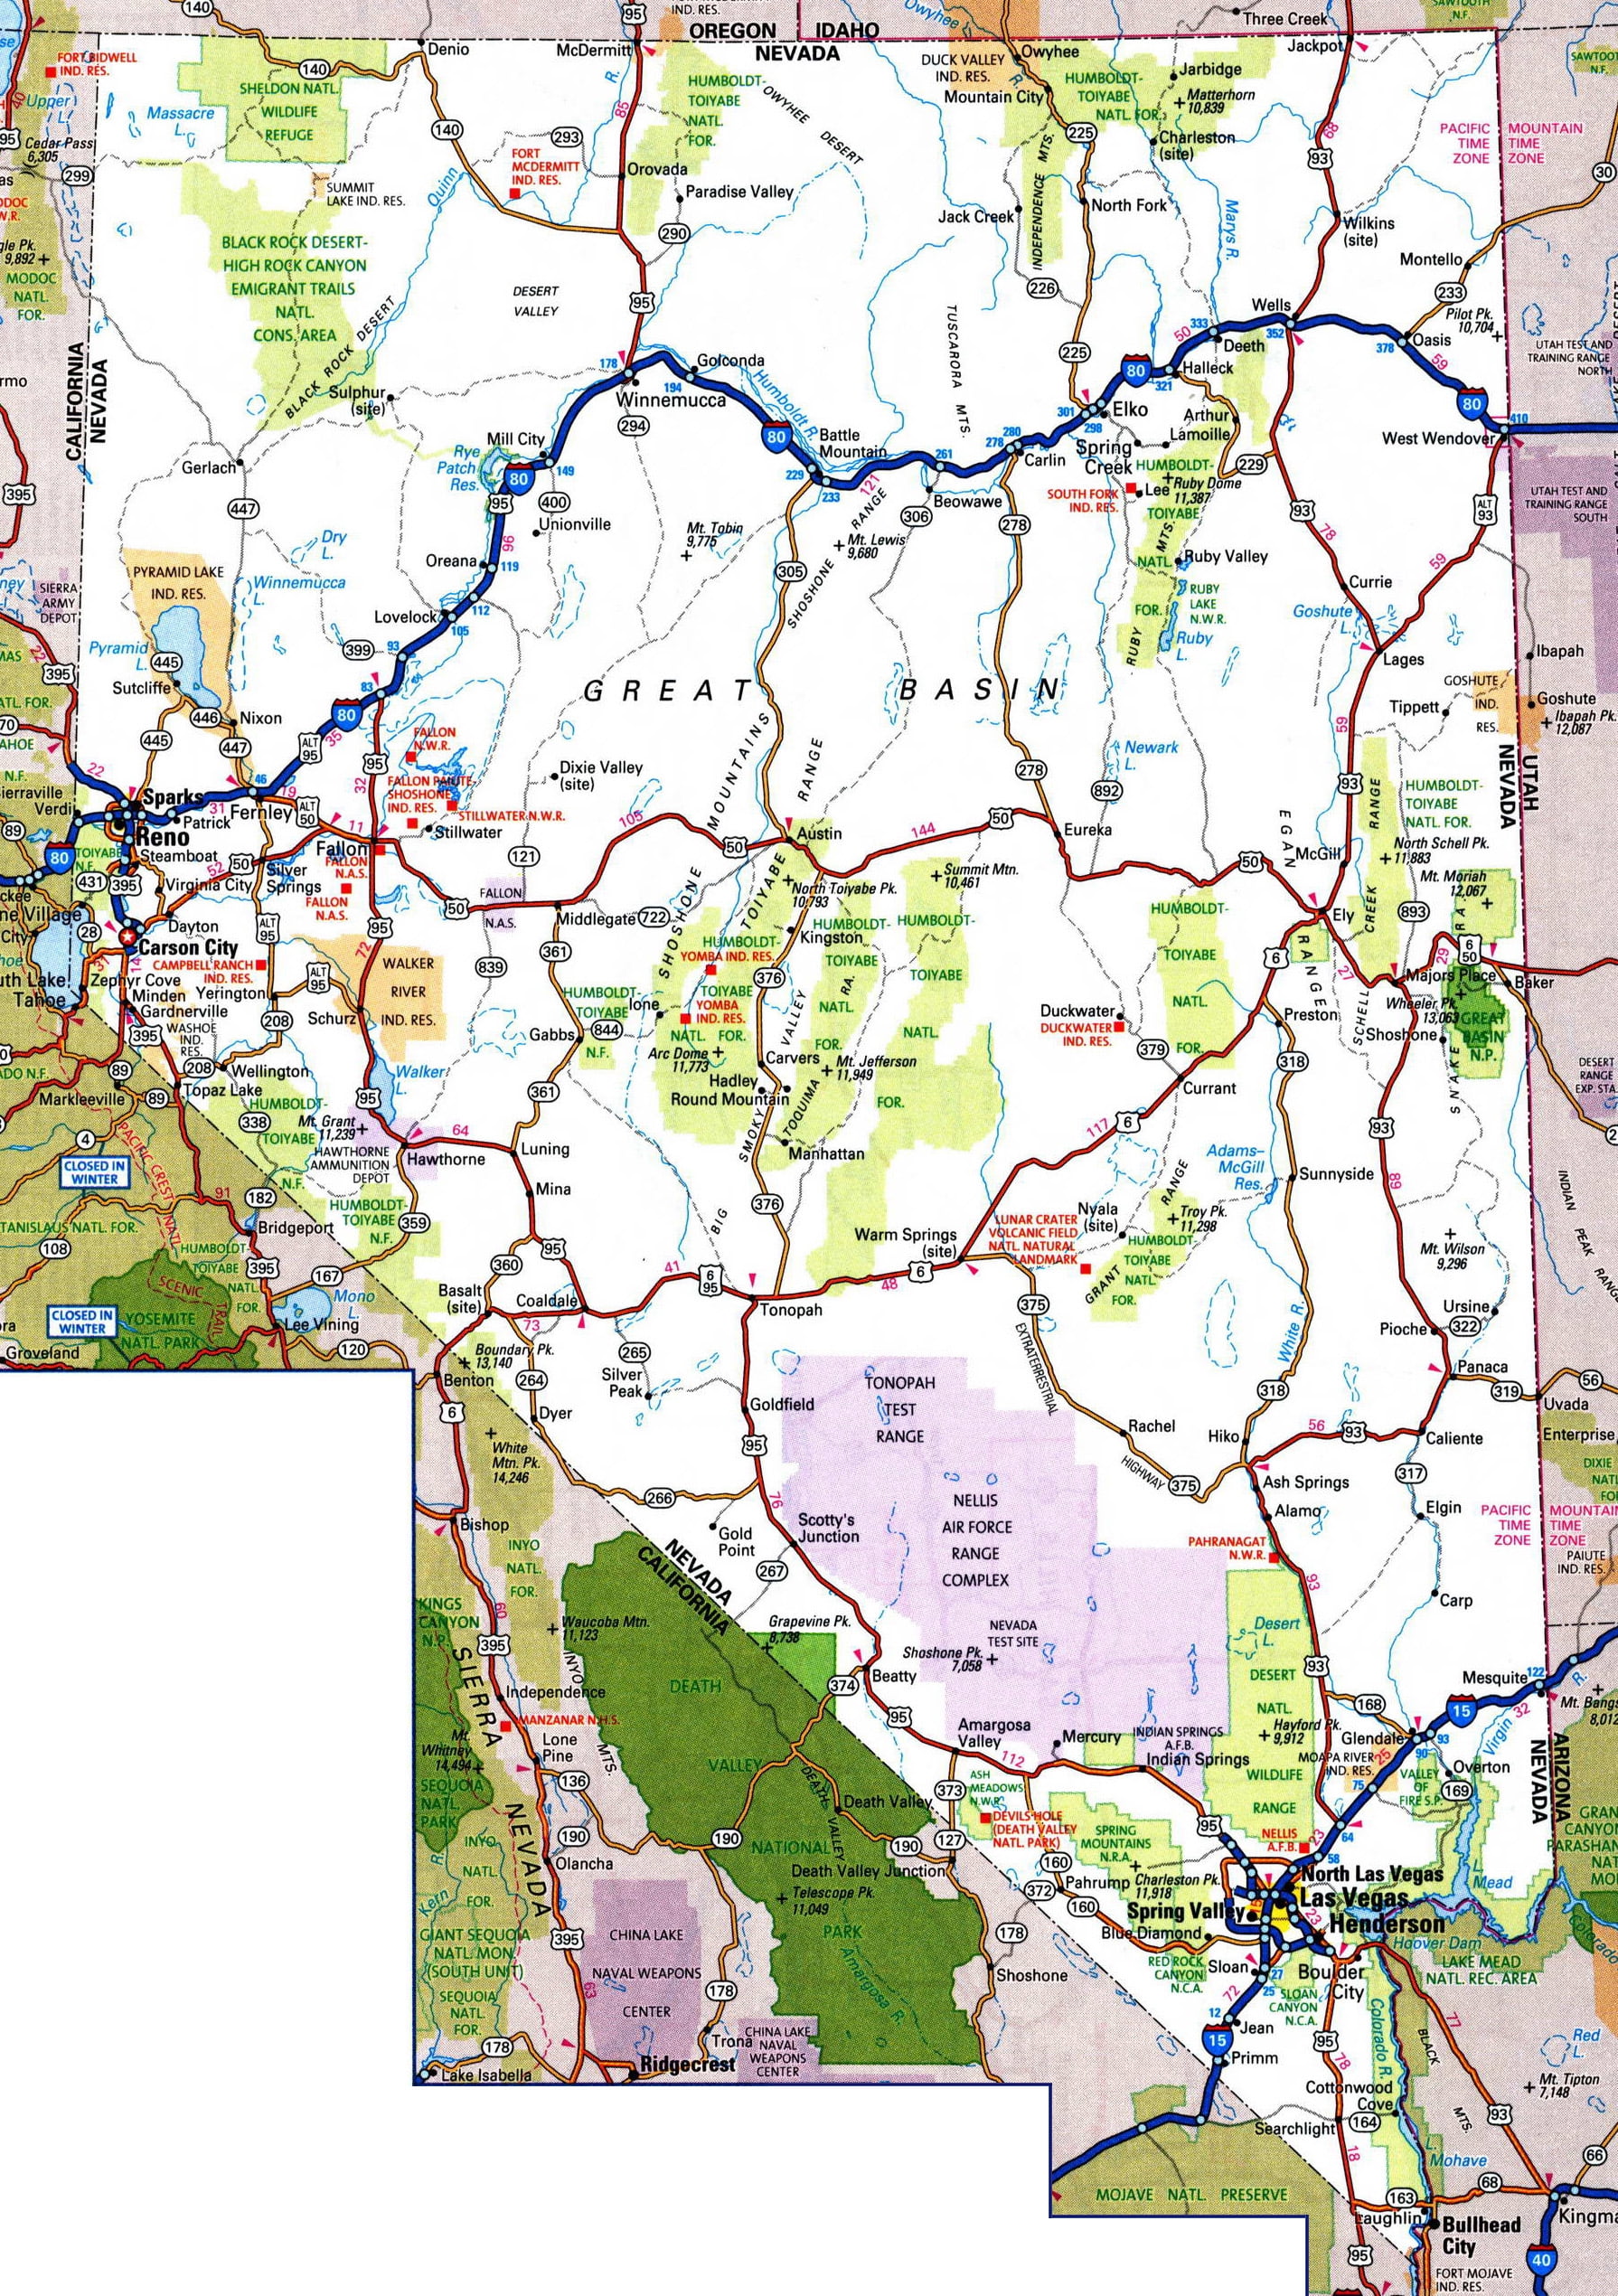 Laminated Map - Large detailed roads and highways map of Nevada state